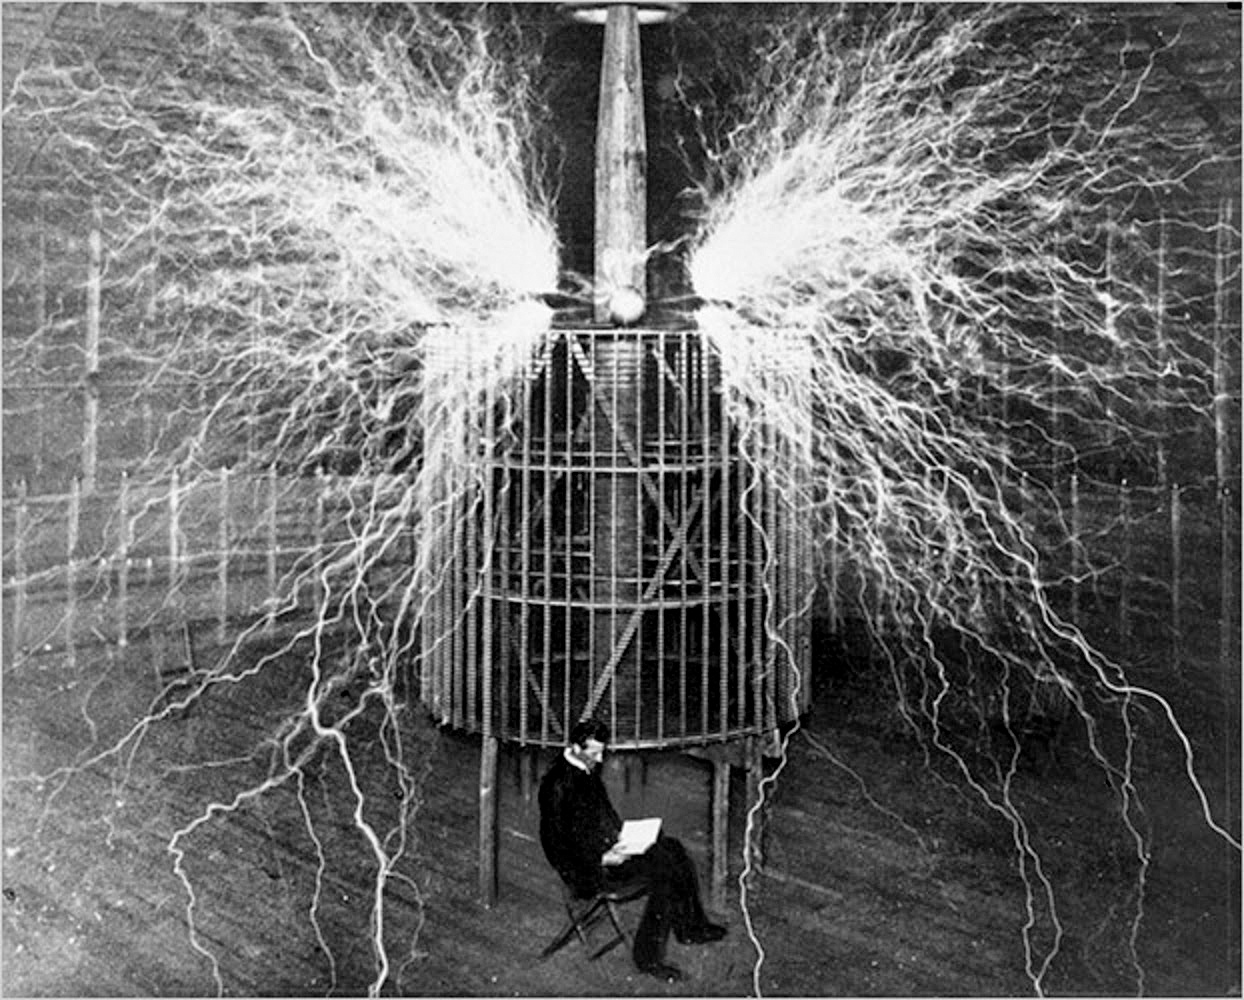 10. A multiple exposure picture of Tesla with his Magnifying transmitter2